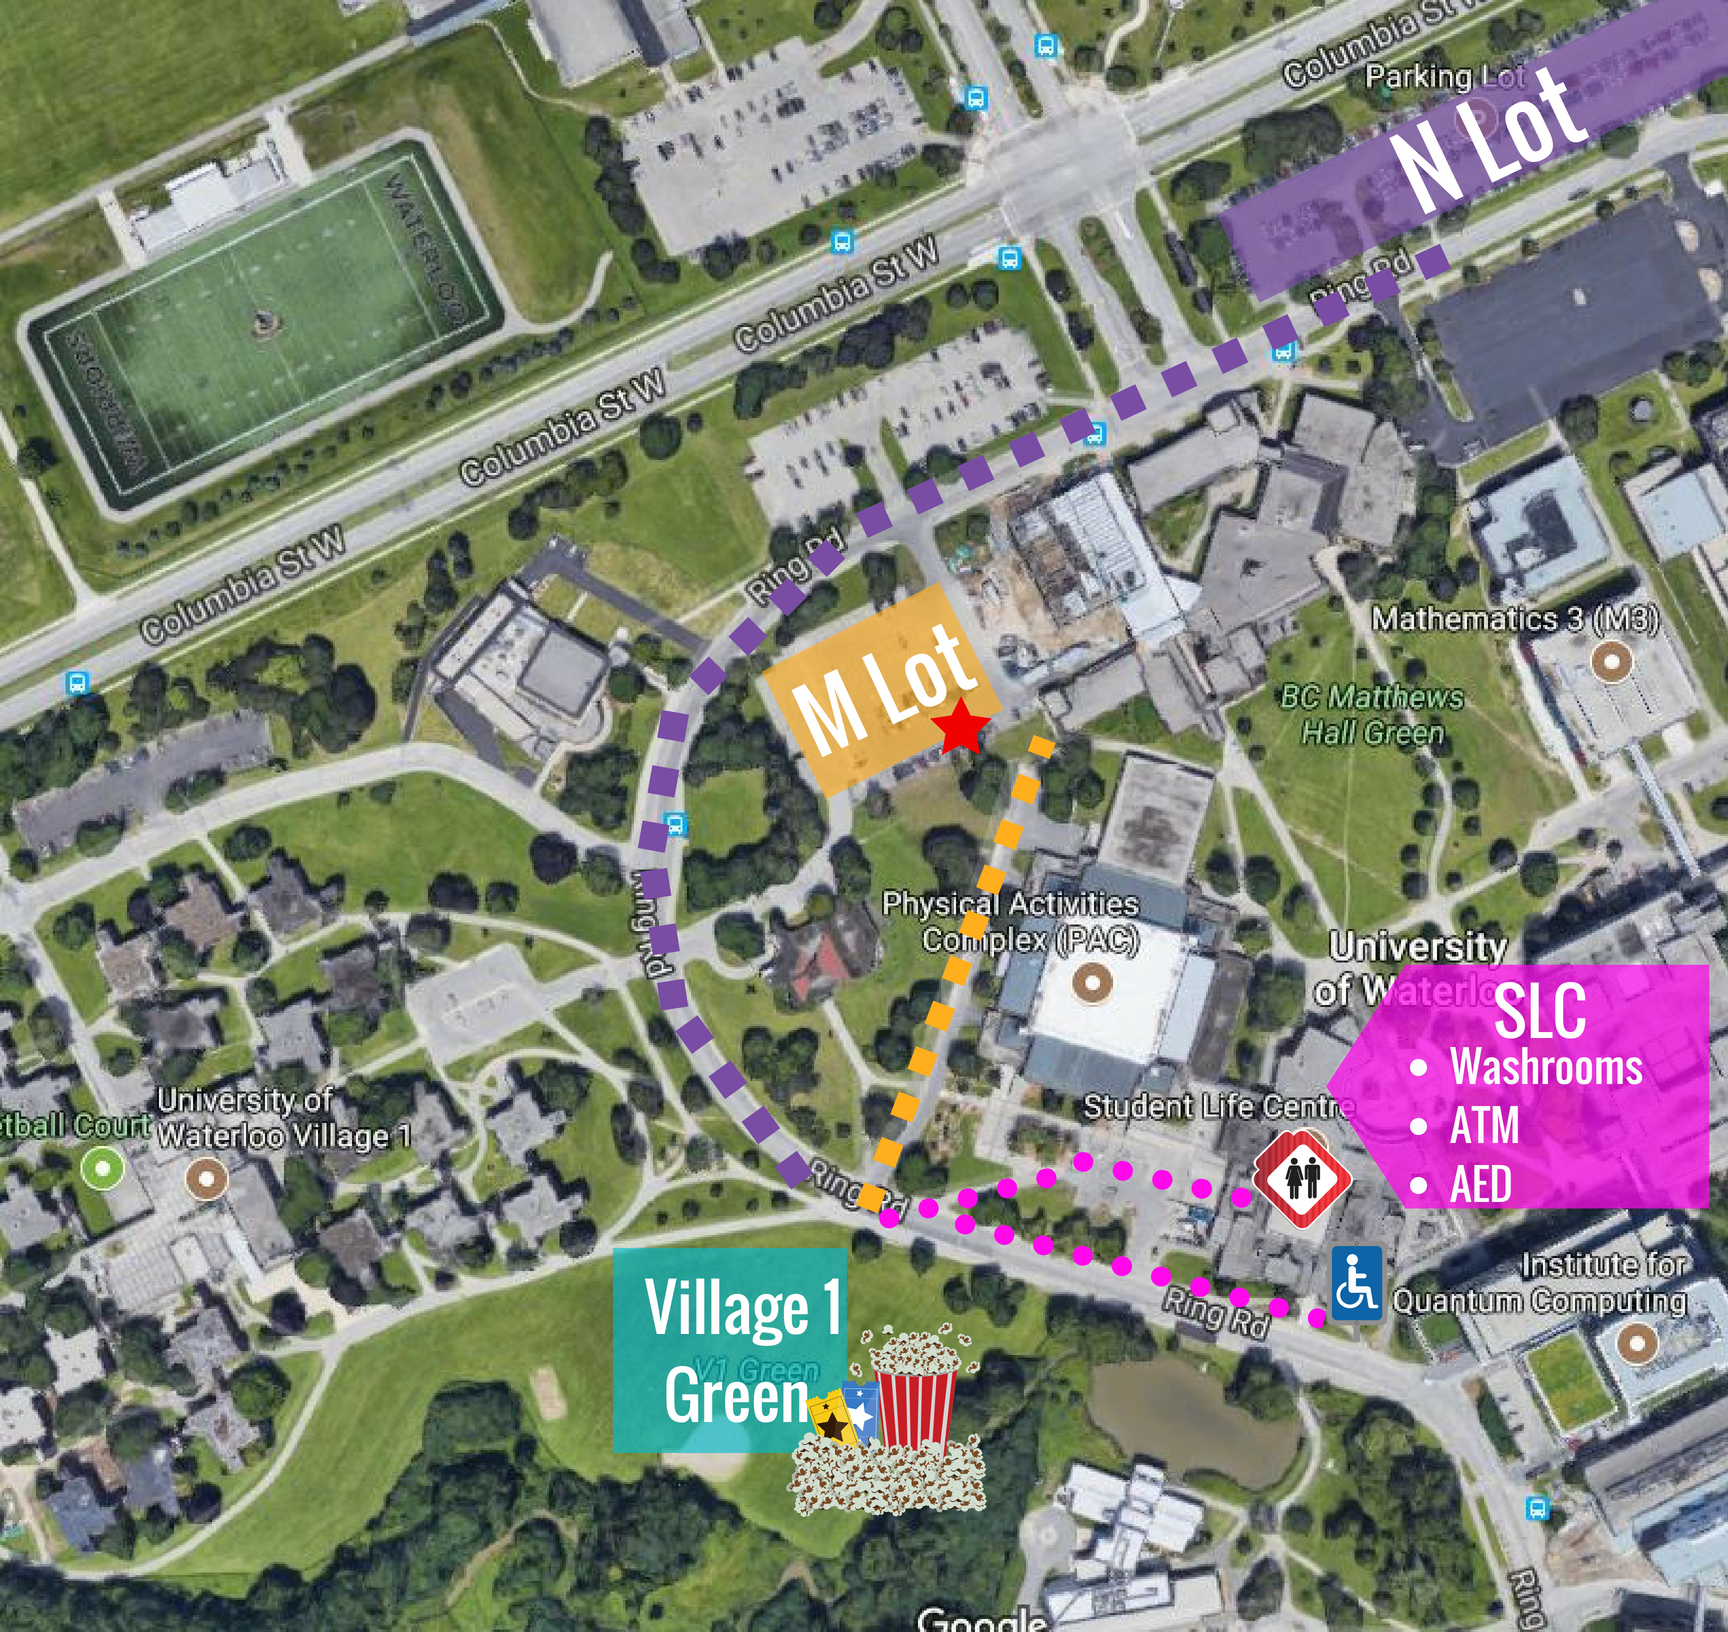 Map of University of Waterloo Campus with directions to the event venue.